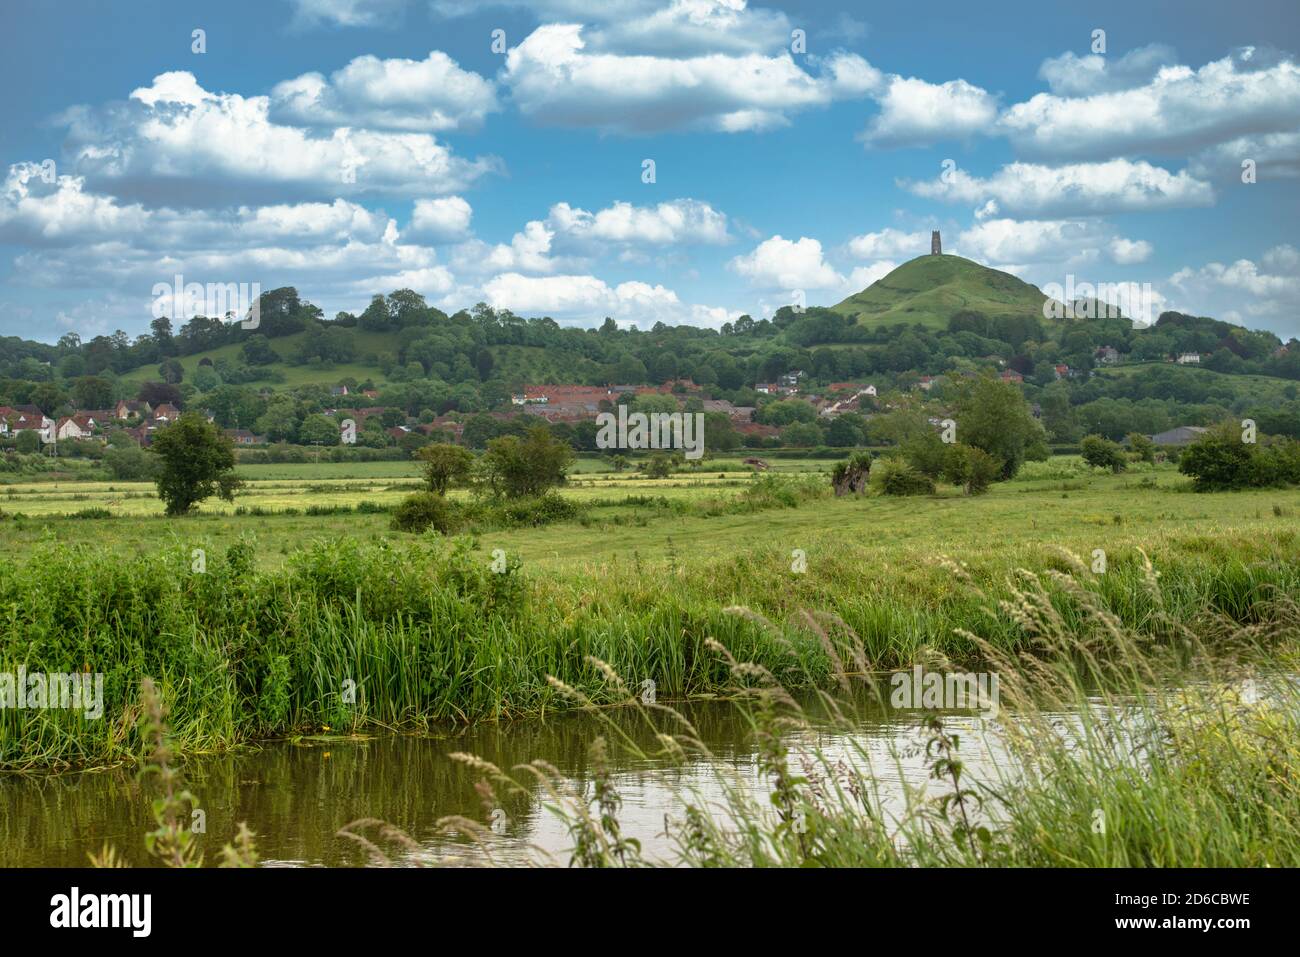 Glastonbury Tor in the distance on a bright, sunny day. Somerset, England. Tor on right of image with a local stream and farmland in foreground. Stock Photo